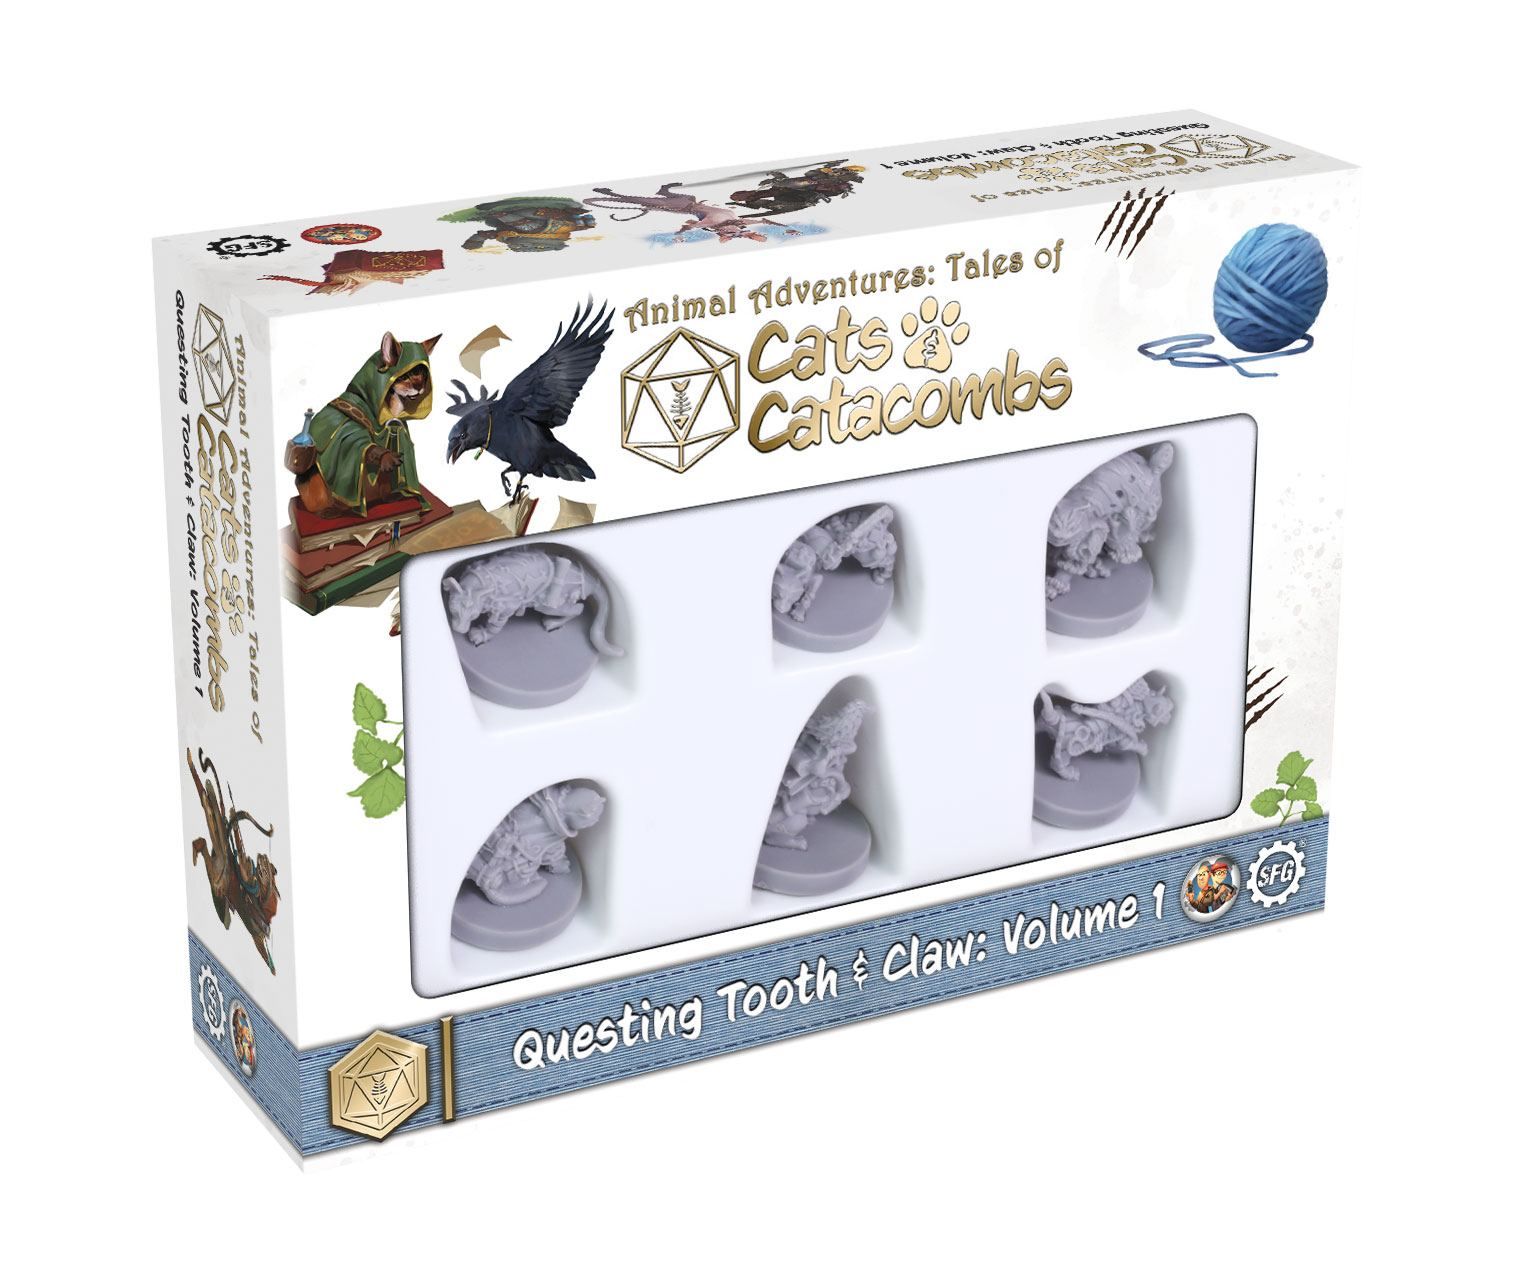 Animal Adventures Cats & Catacombs: Questing Tooth & Claw Miniatures 6-pack Volume 1 Anglická Steamforged Games